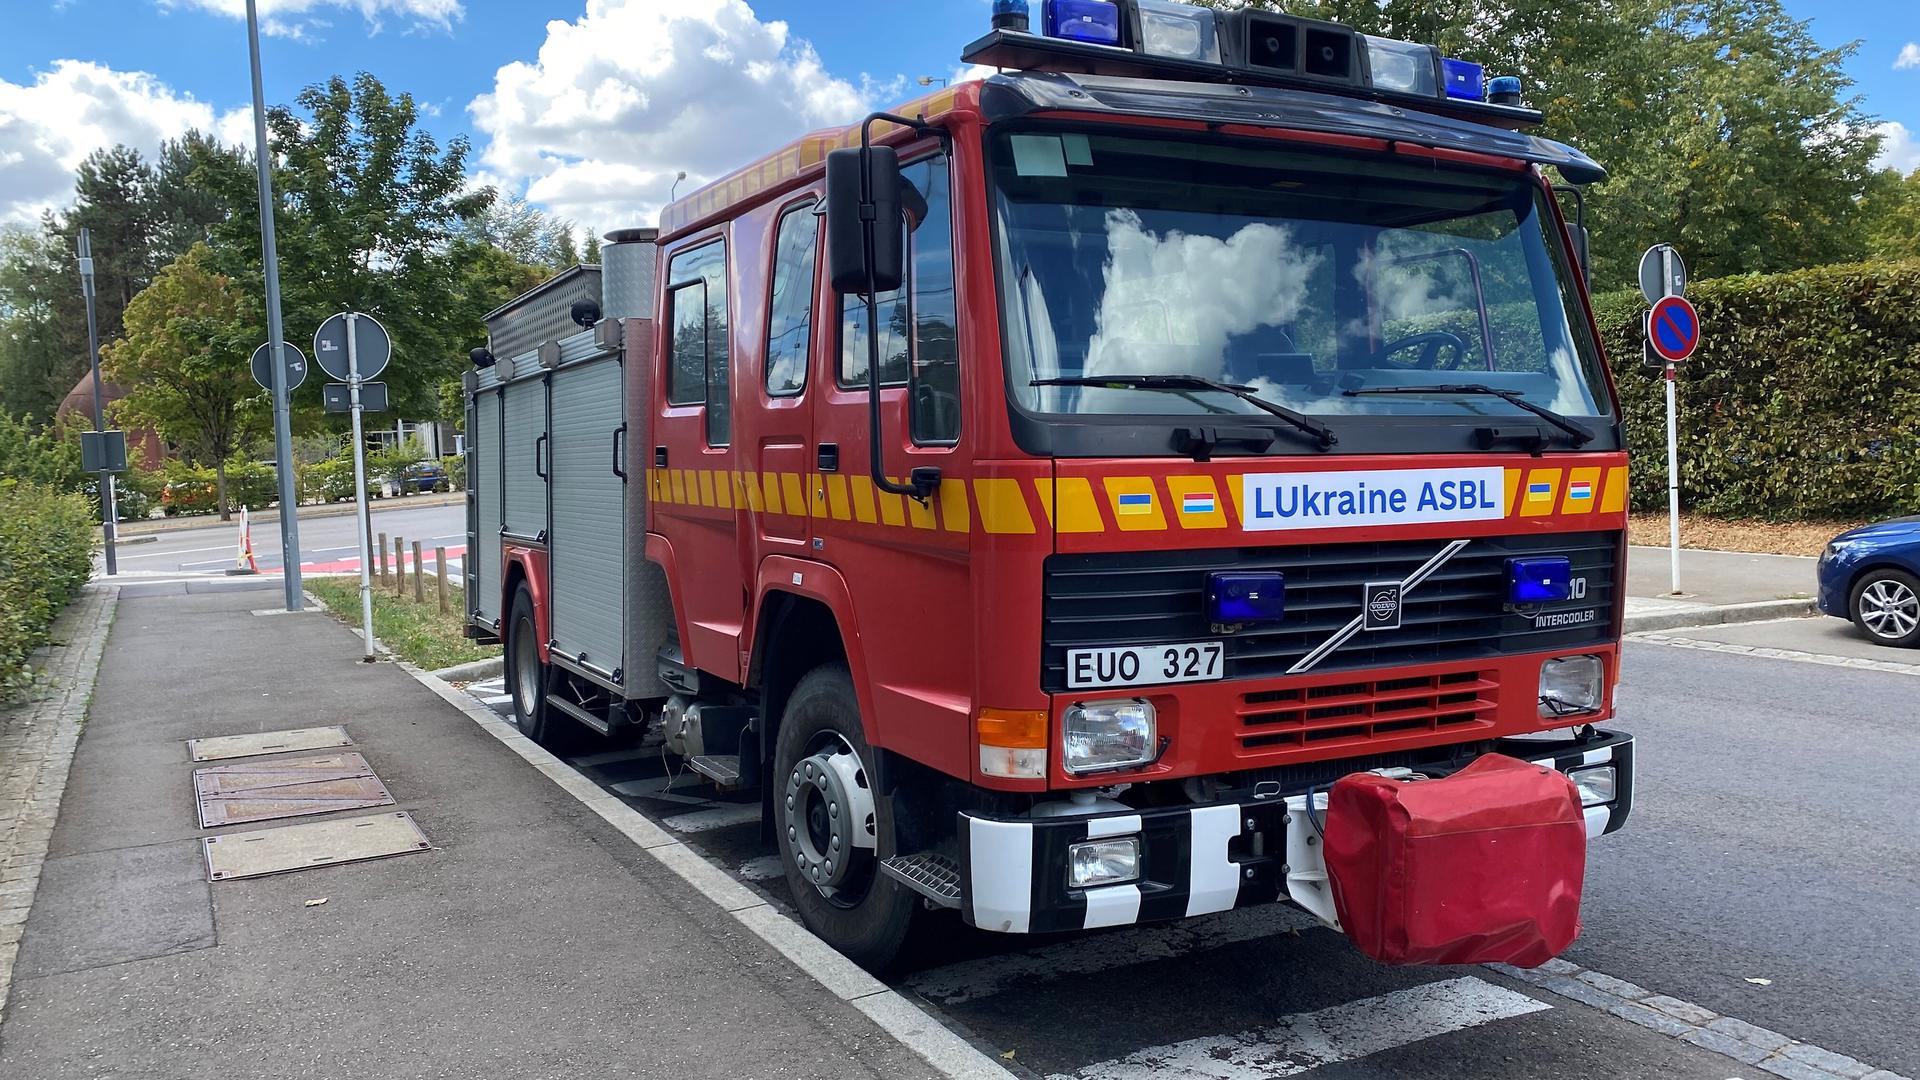 One of the five fire trucks that the help group Lukraine is planning to send to Ukraine